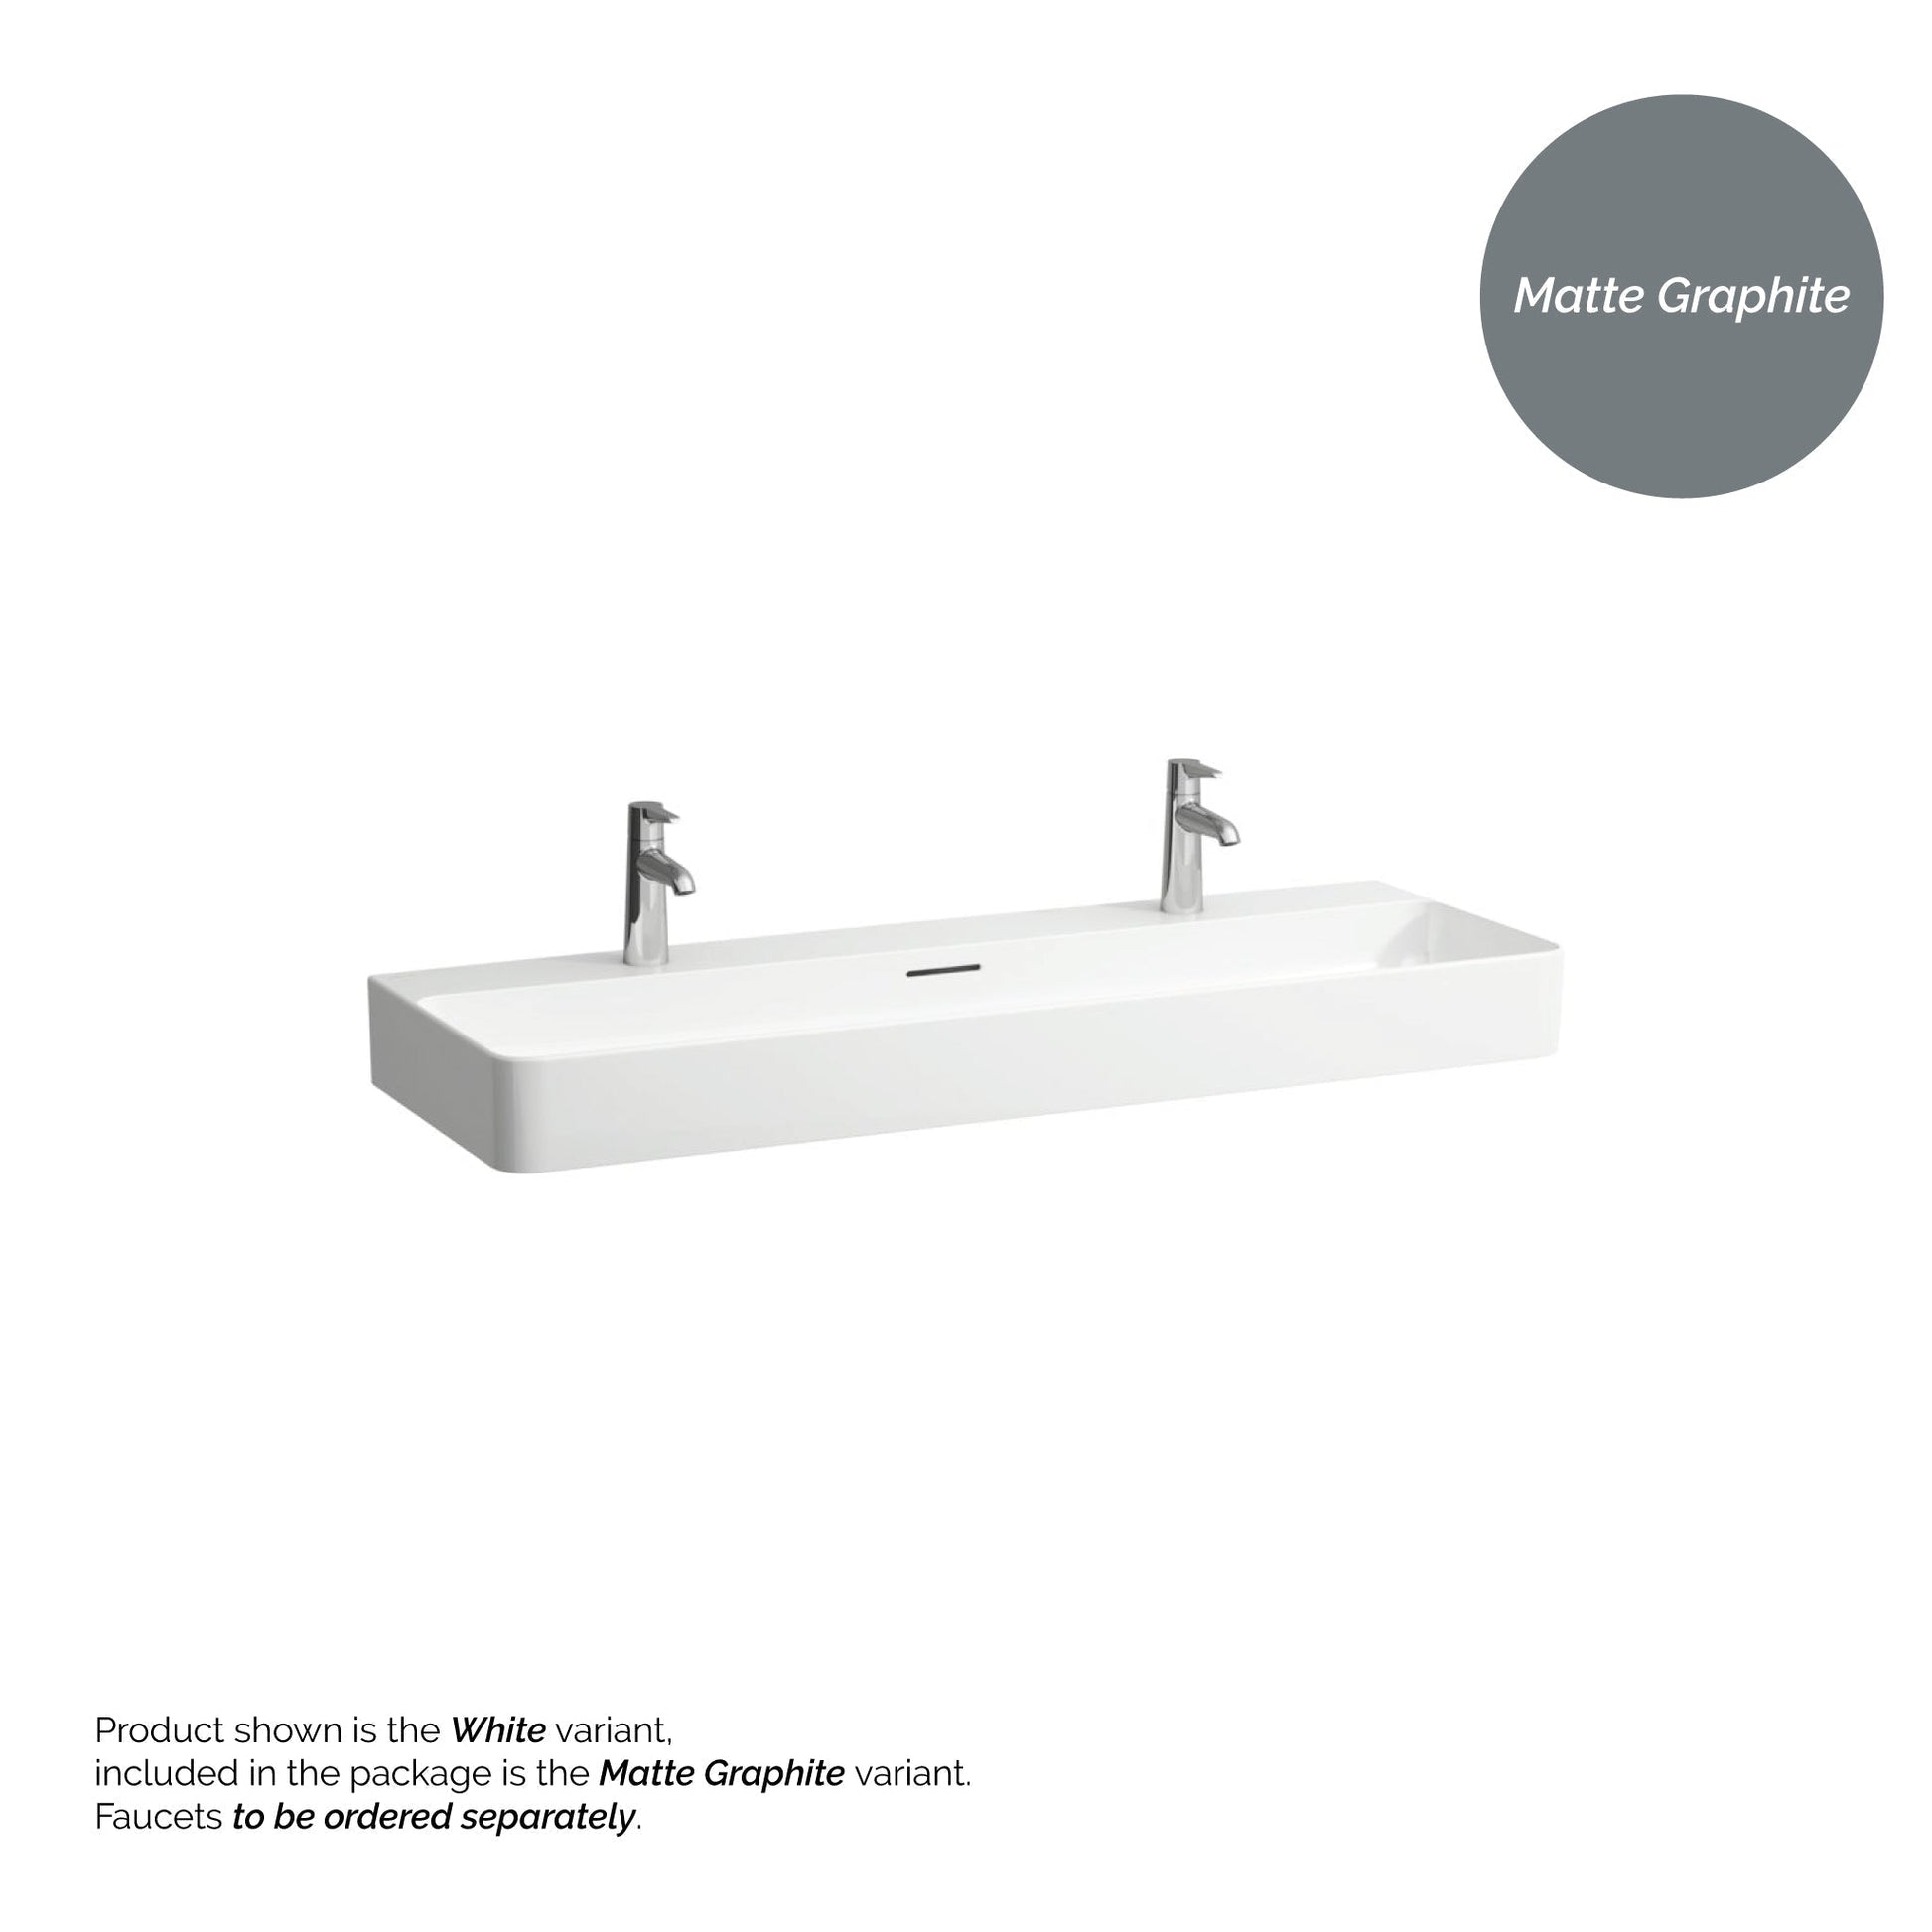 Laufen Val 47" x 17" Matte Graphite Ceramic Wall-Mounted Trough Bathroom Sink With 2 Faucet Holes